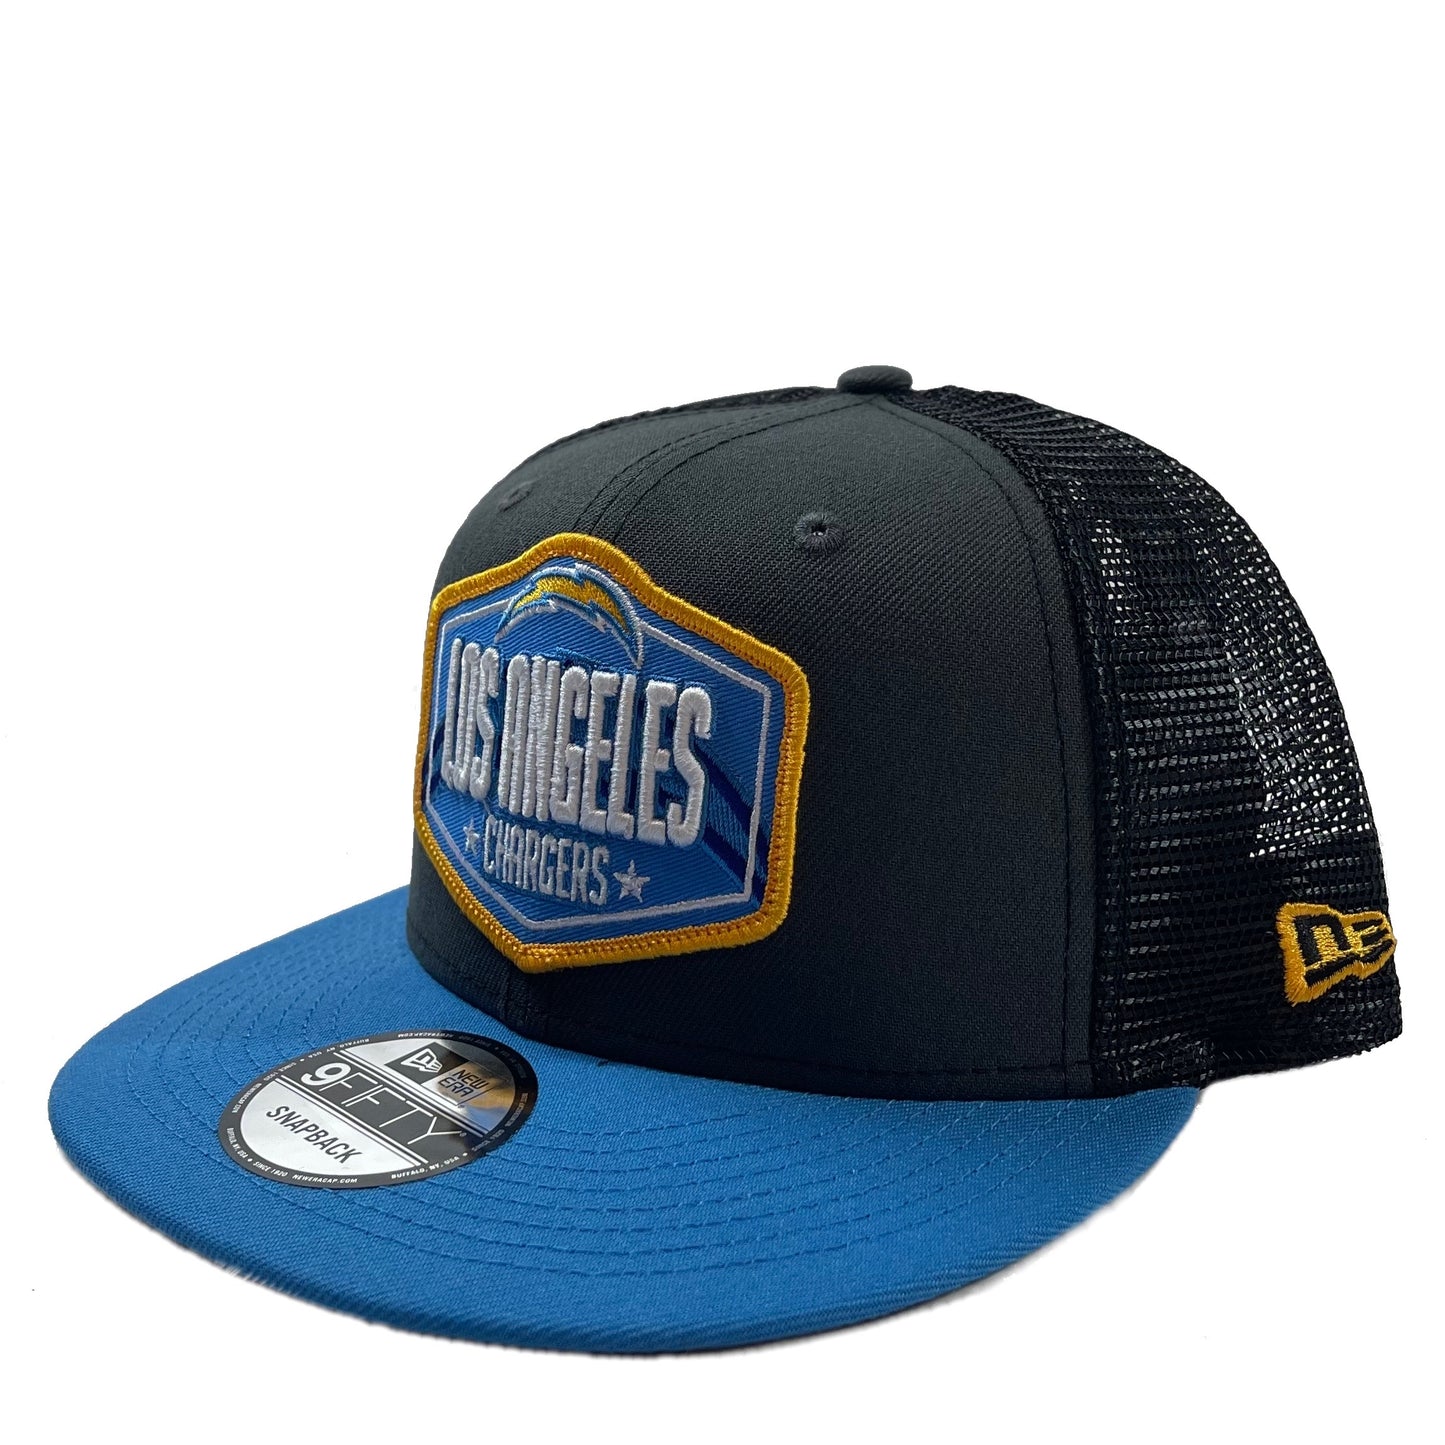 Los Angeles Chargers Draft Day Trucker Hat (Grey) Snapback